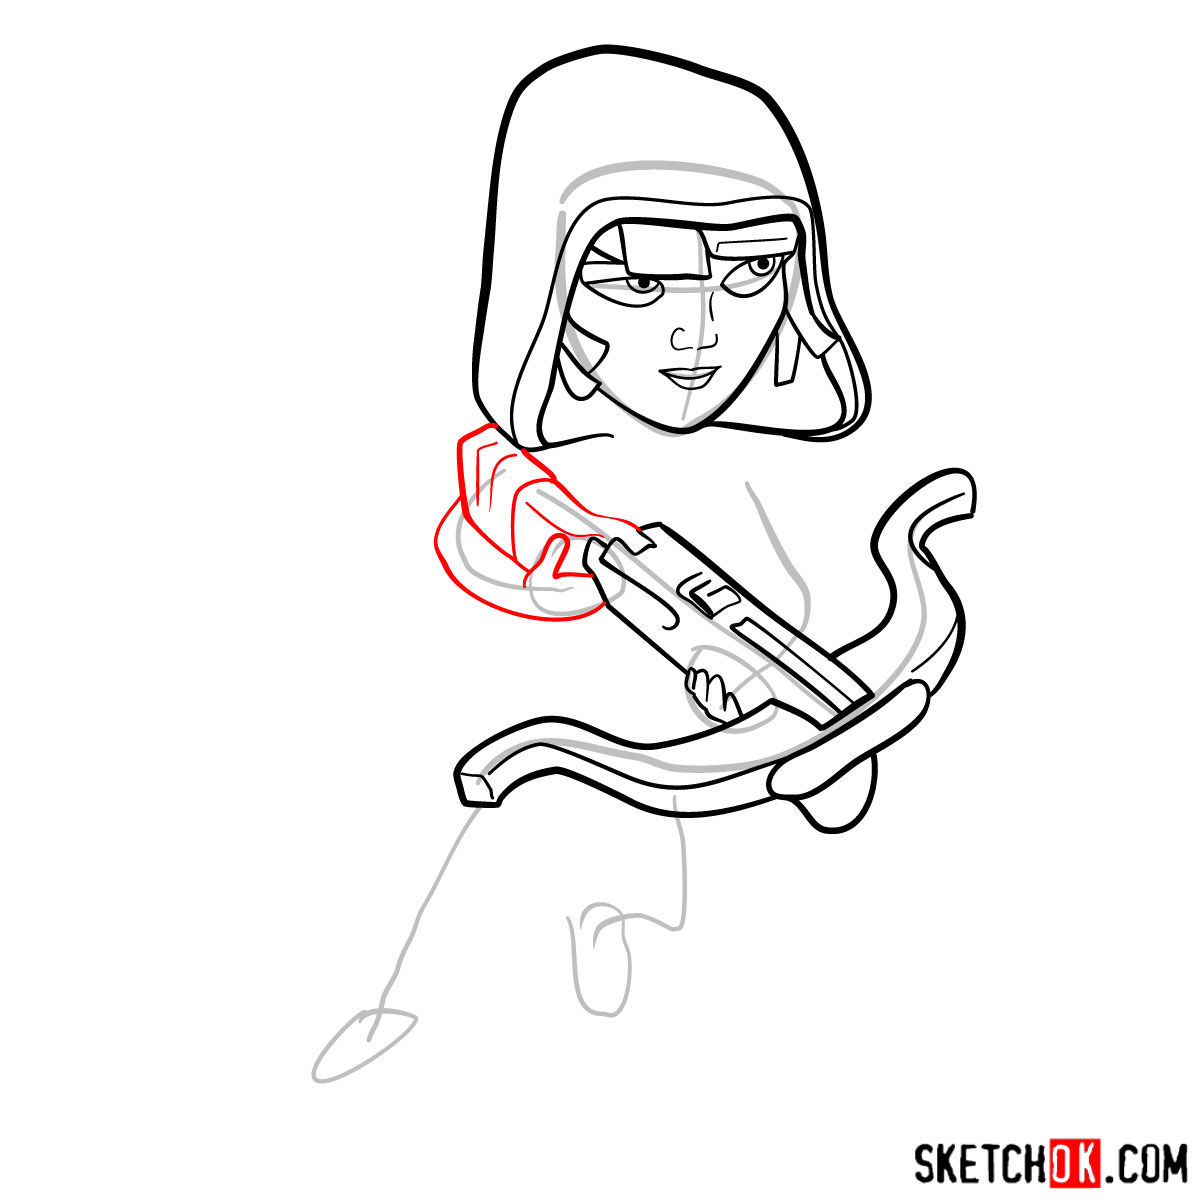 How to draw Sneaky Archer from Clash of Clans - step 05